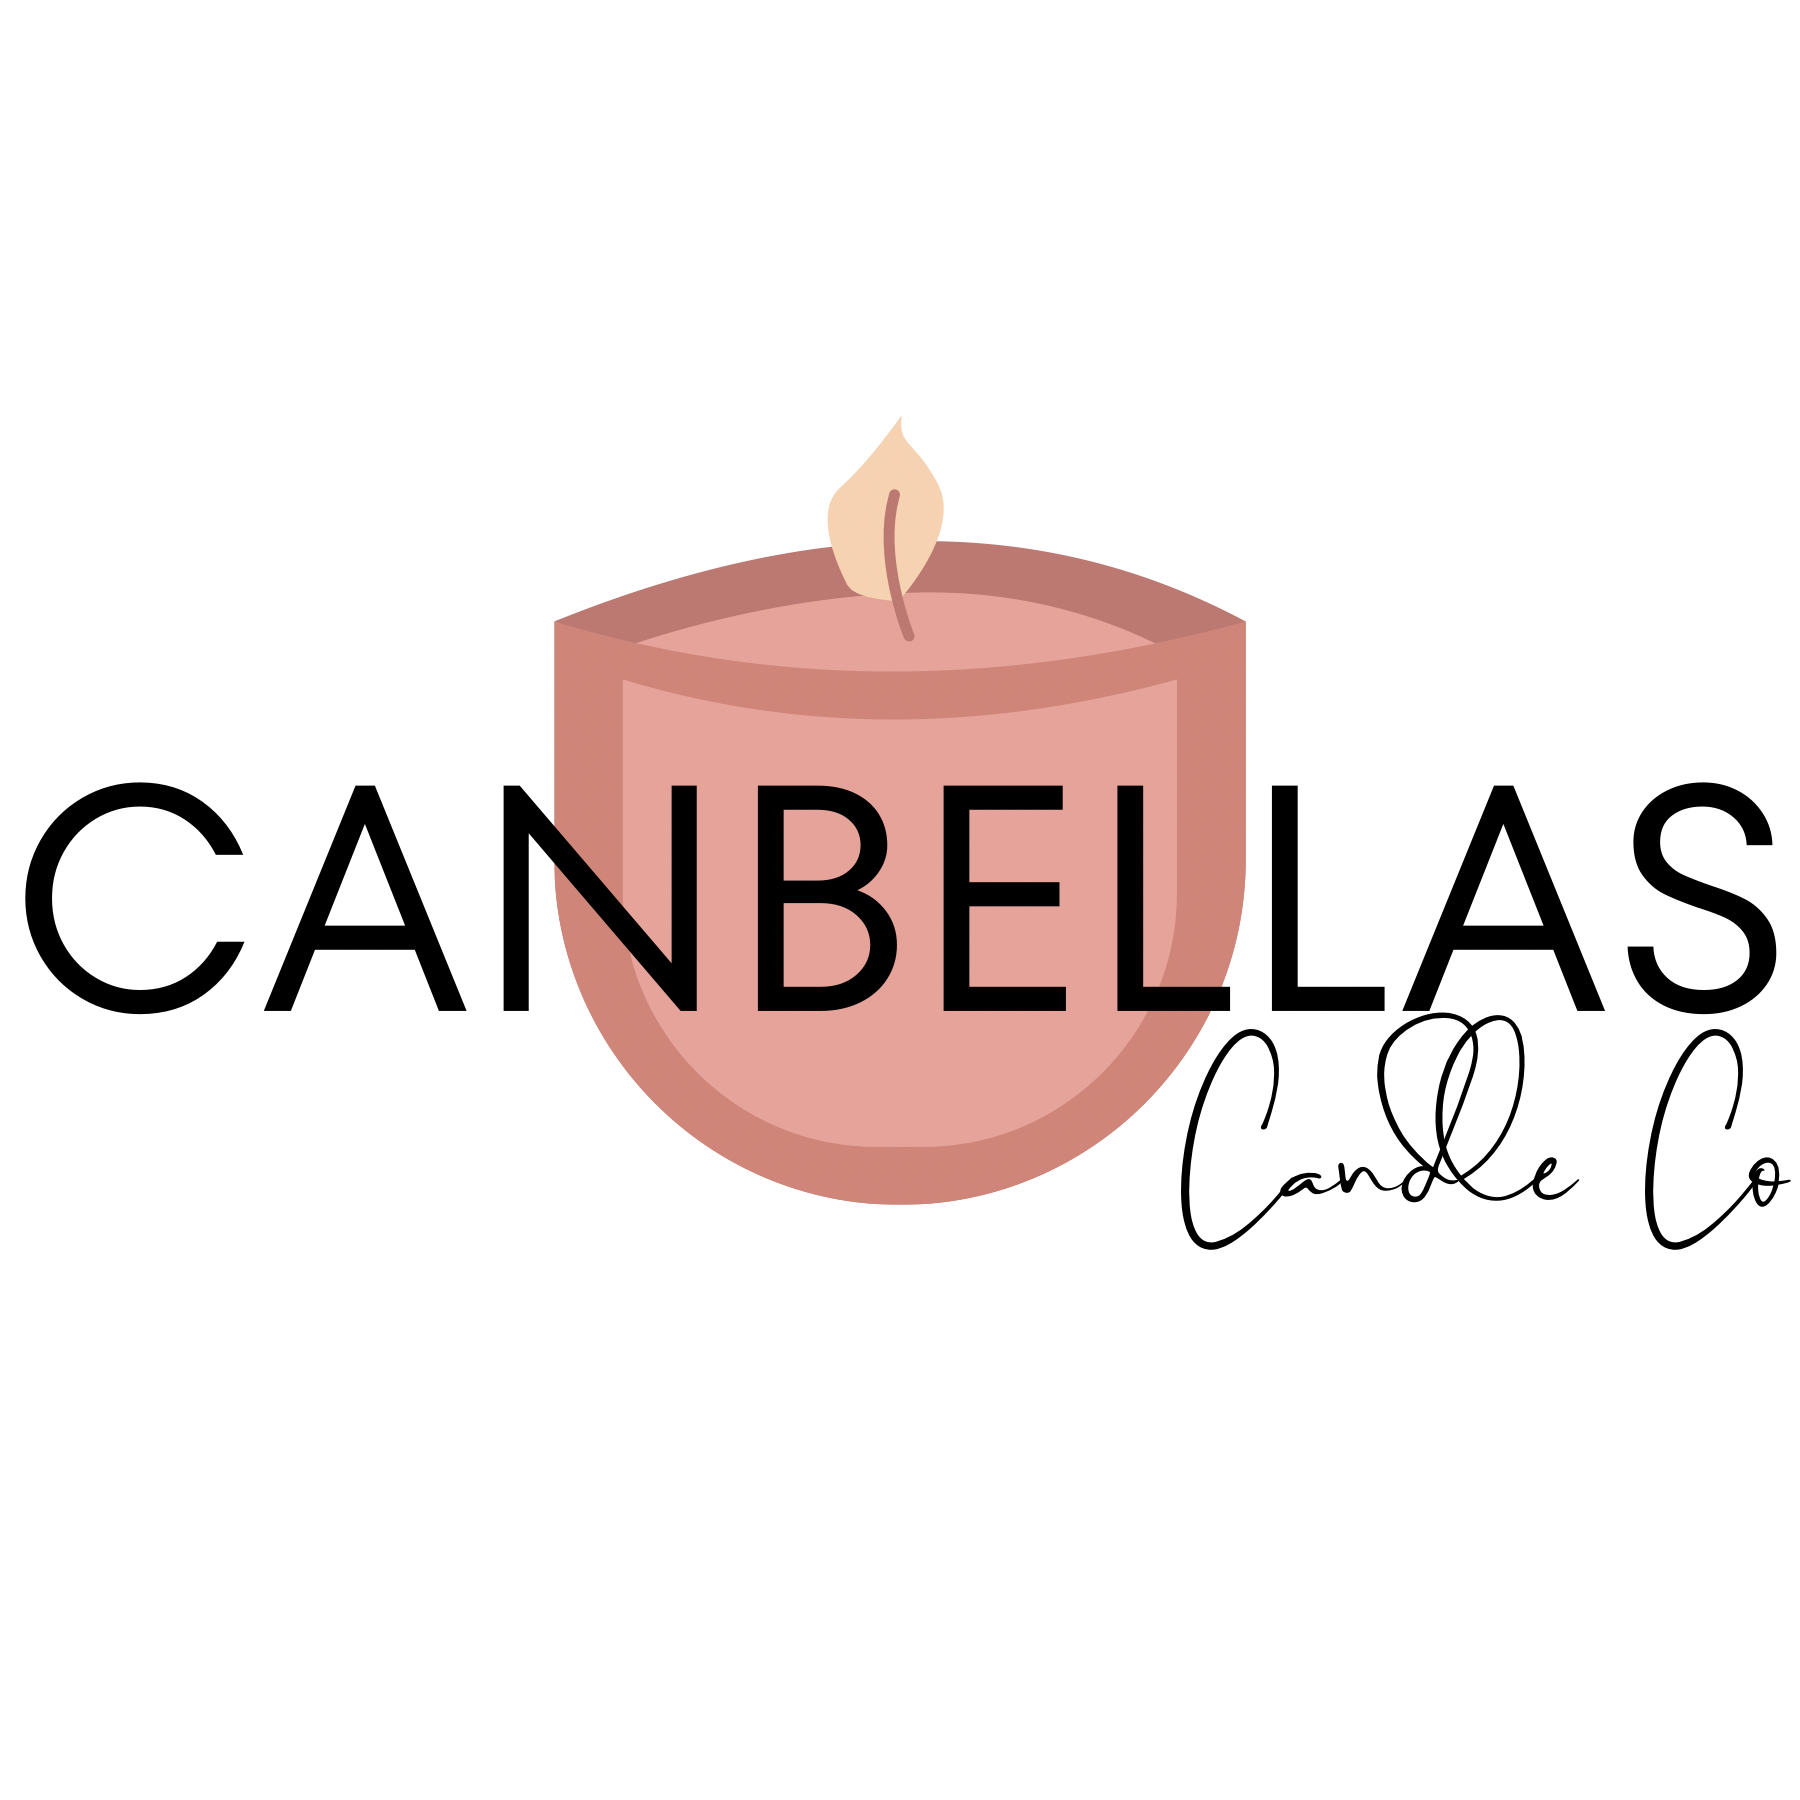 Canbellas Candle Co